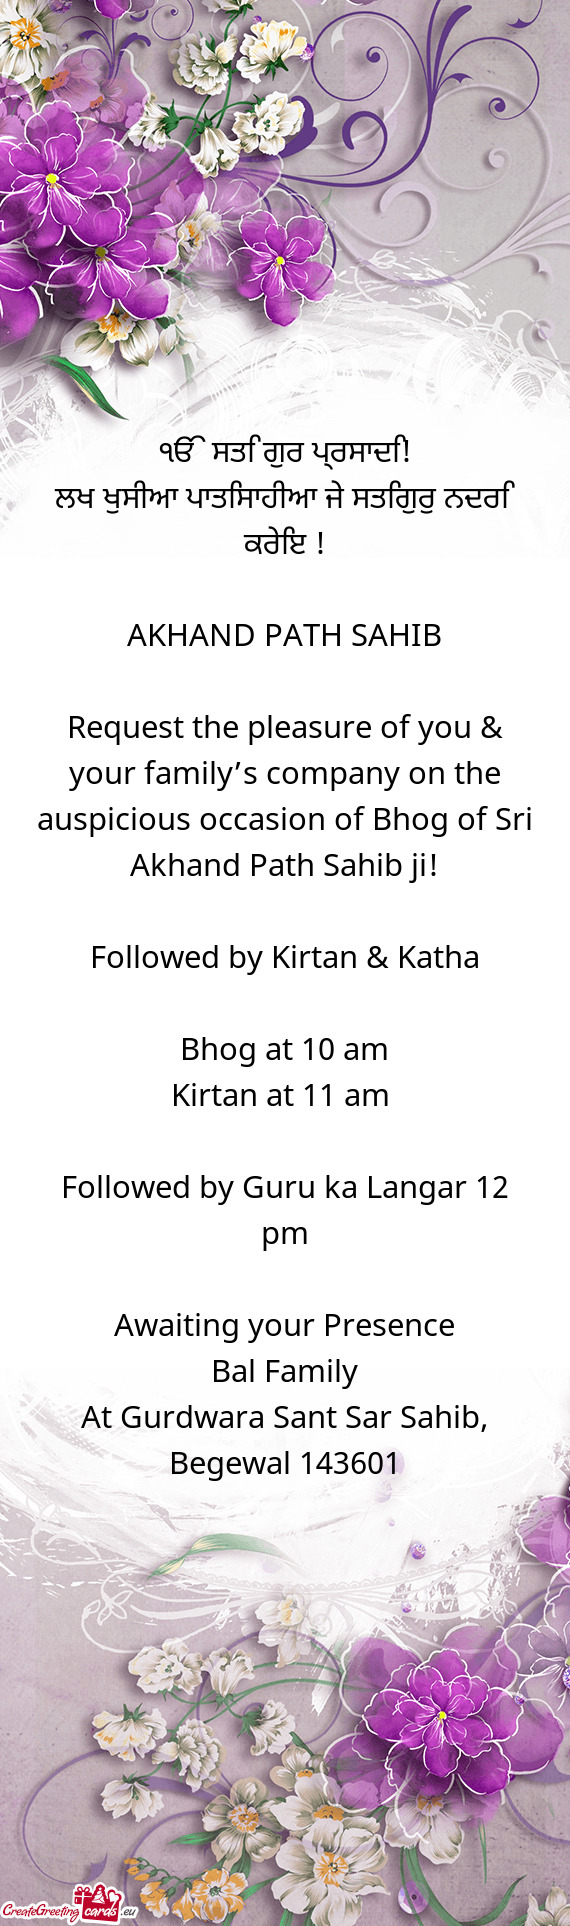 Request the pleasure of you & your family’s company on the auspicious occasion of Bhog of Sri Akha